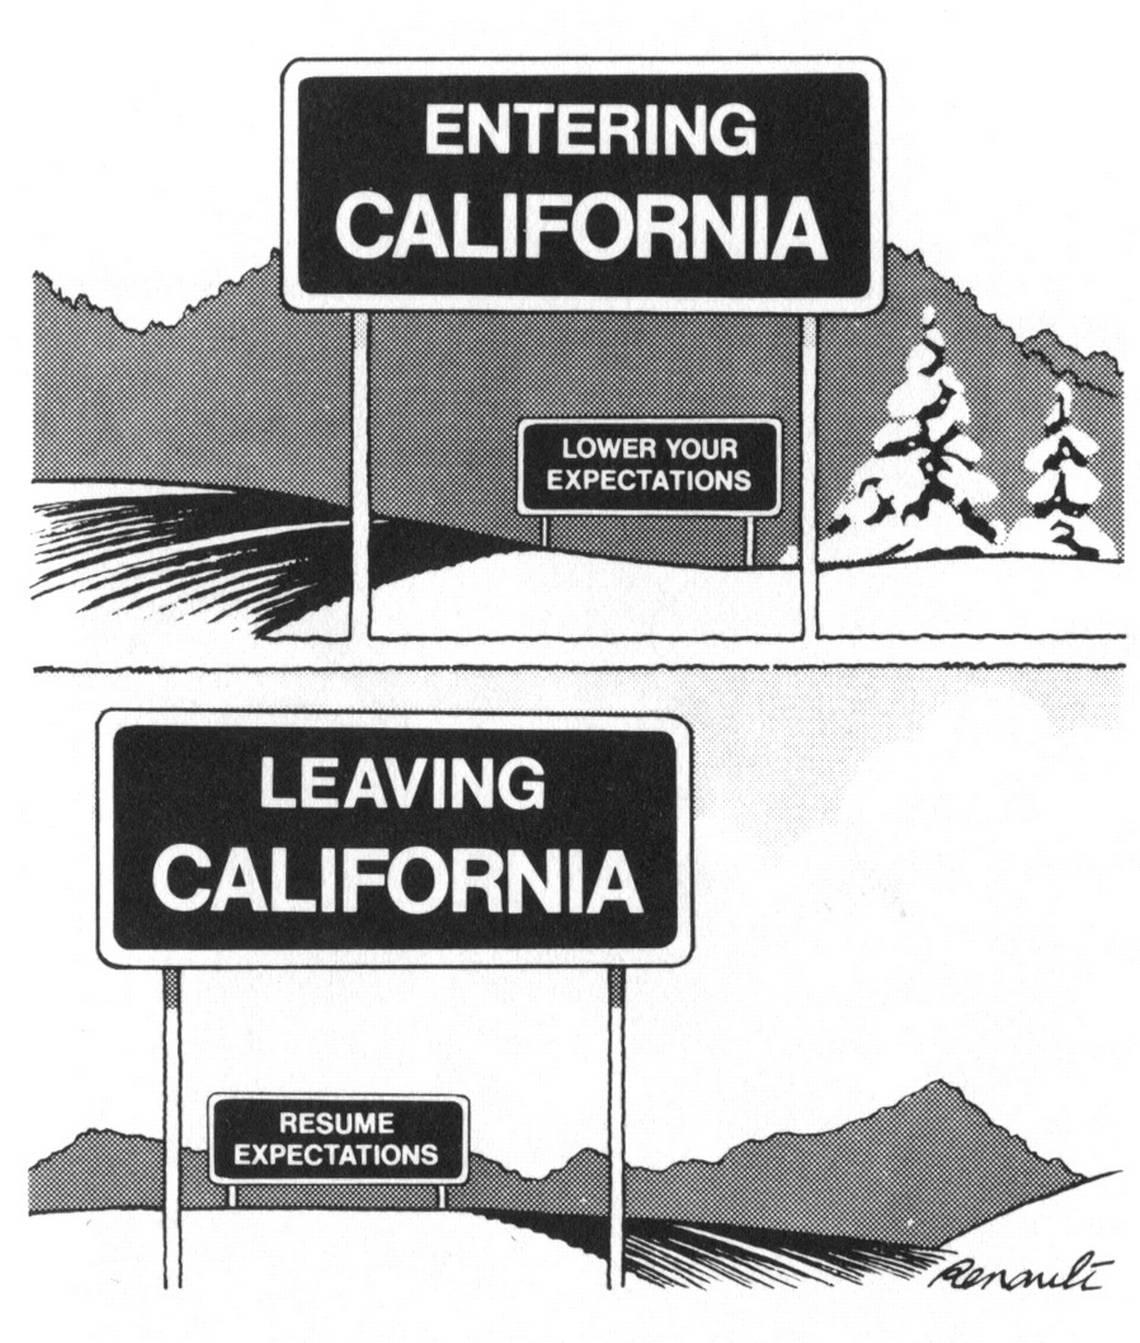 A 1976 editorial cartoon by Dennis Renault shows road signs that mock Gov. Jerry Brown’s “era of limits” catch phrase.